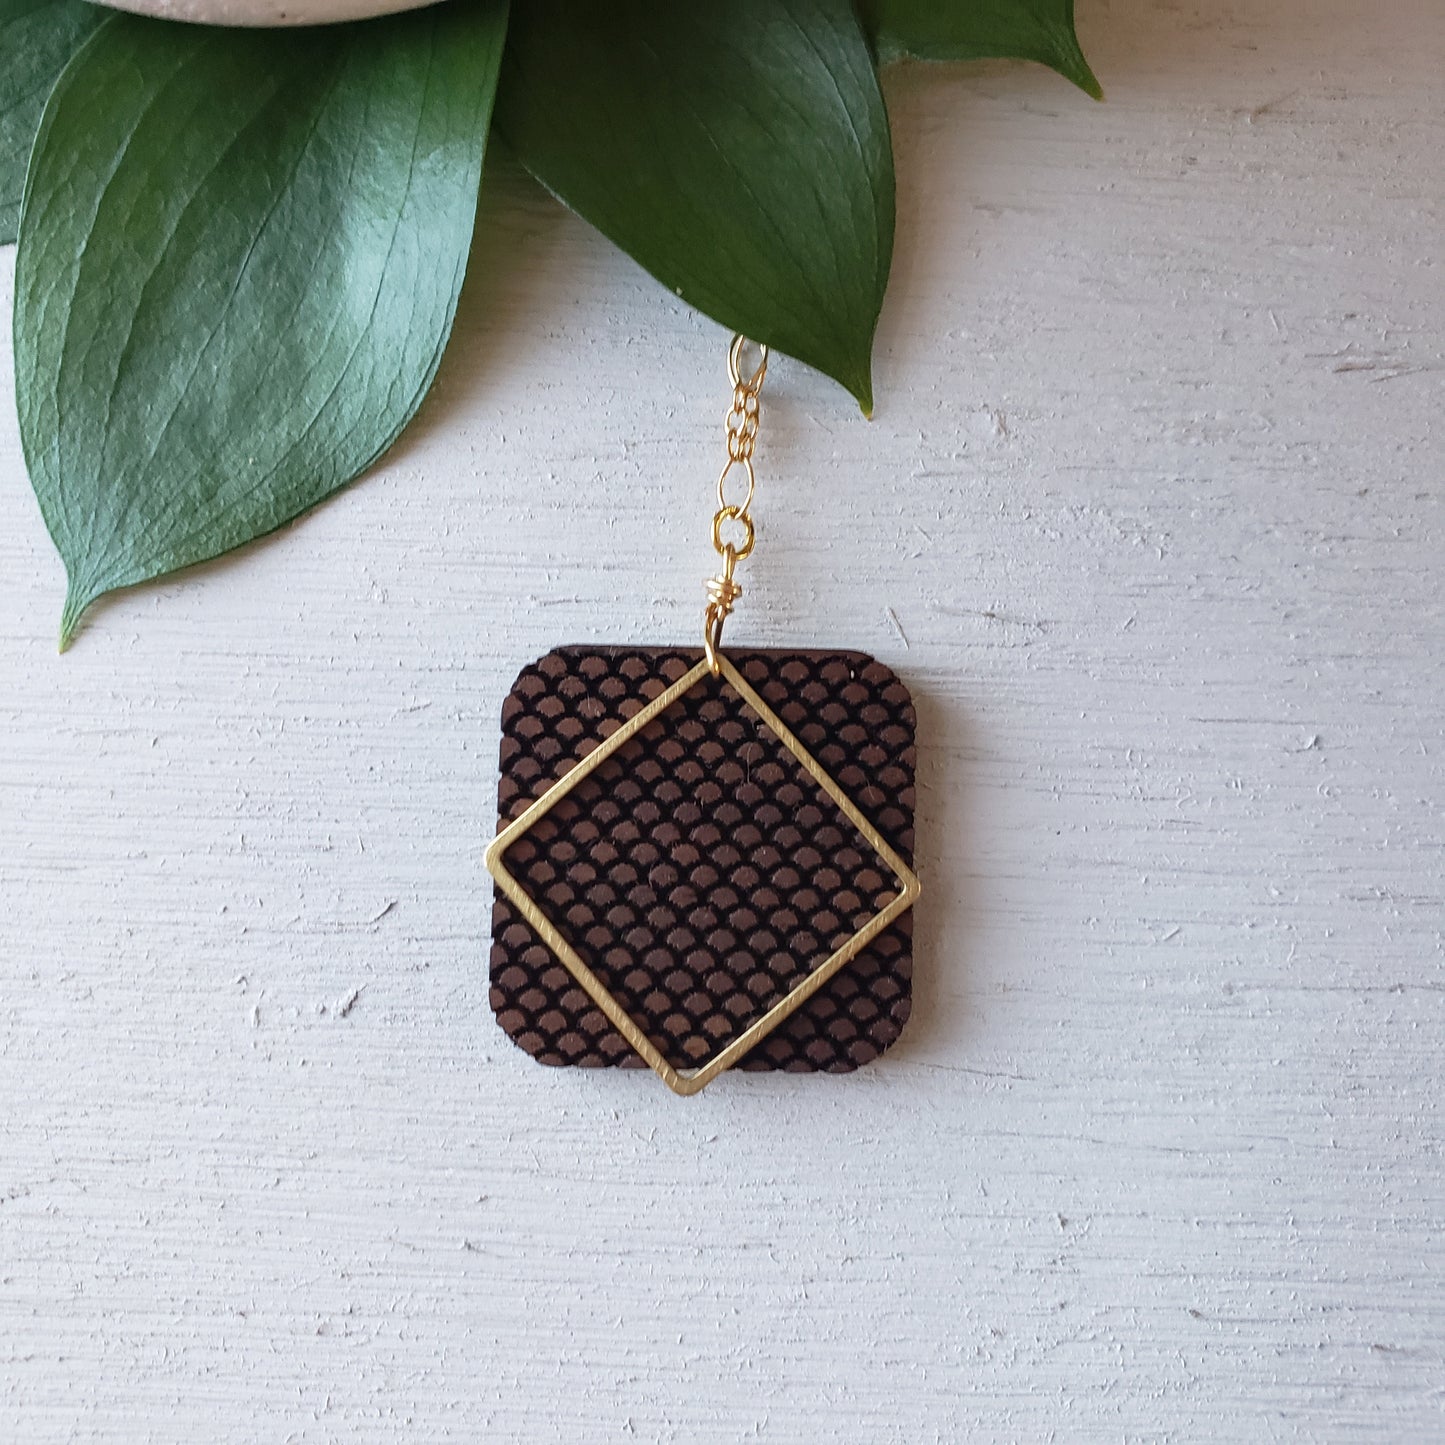 Scales Squared - Wooden Laser Cut Necklace || Modern Geometric Jewelry